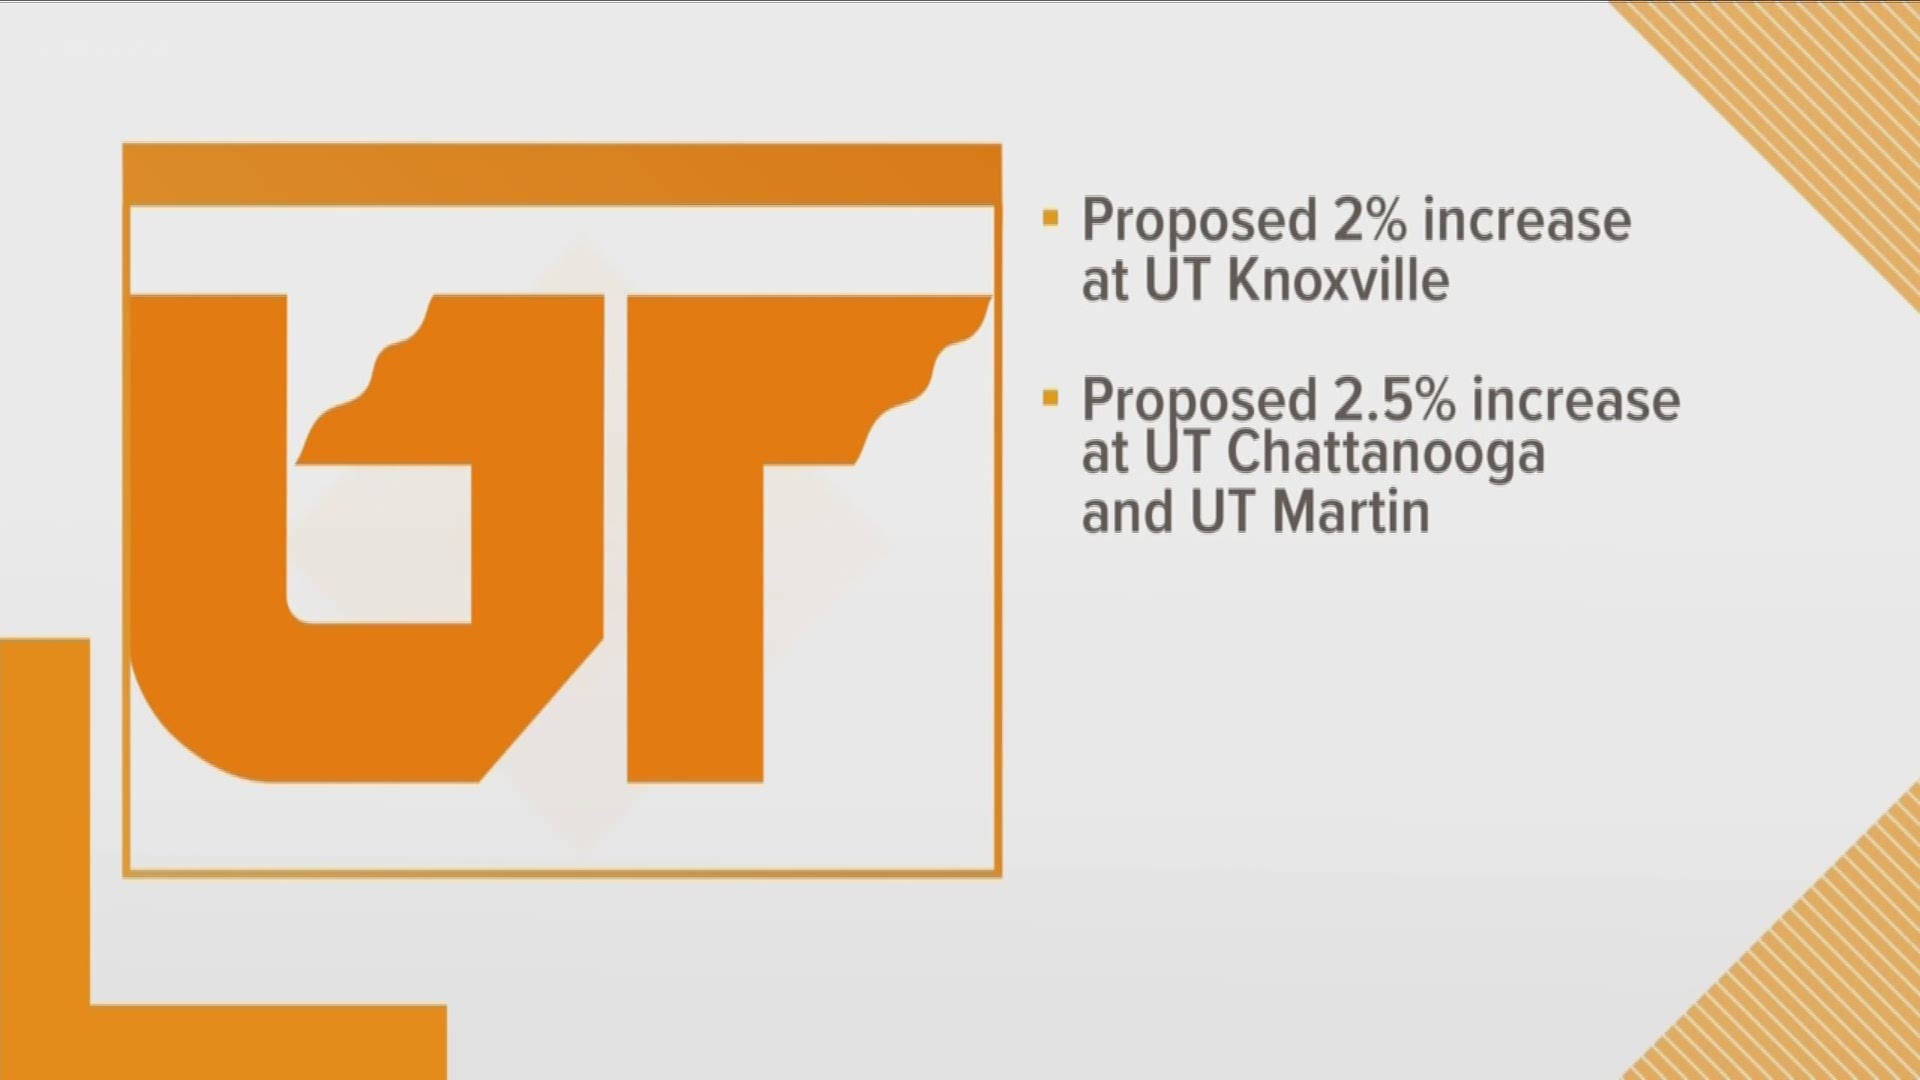 The Board of Trustees will be considering a fifth year of low tuition increases. The board proposed a 2 percent increase at UT Knoxville.